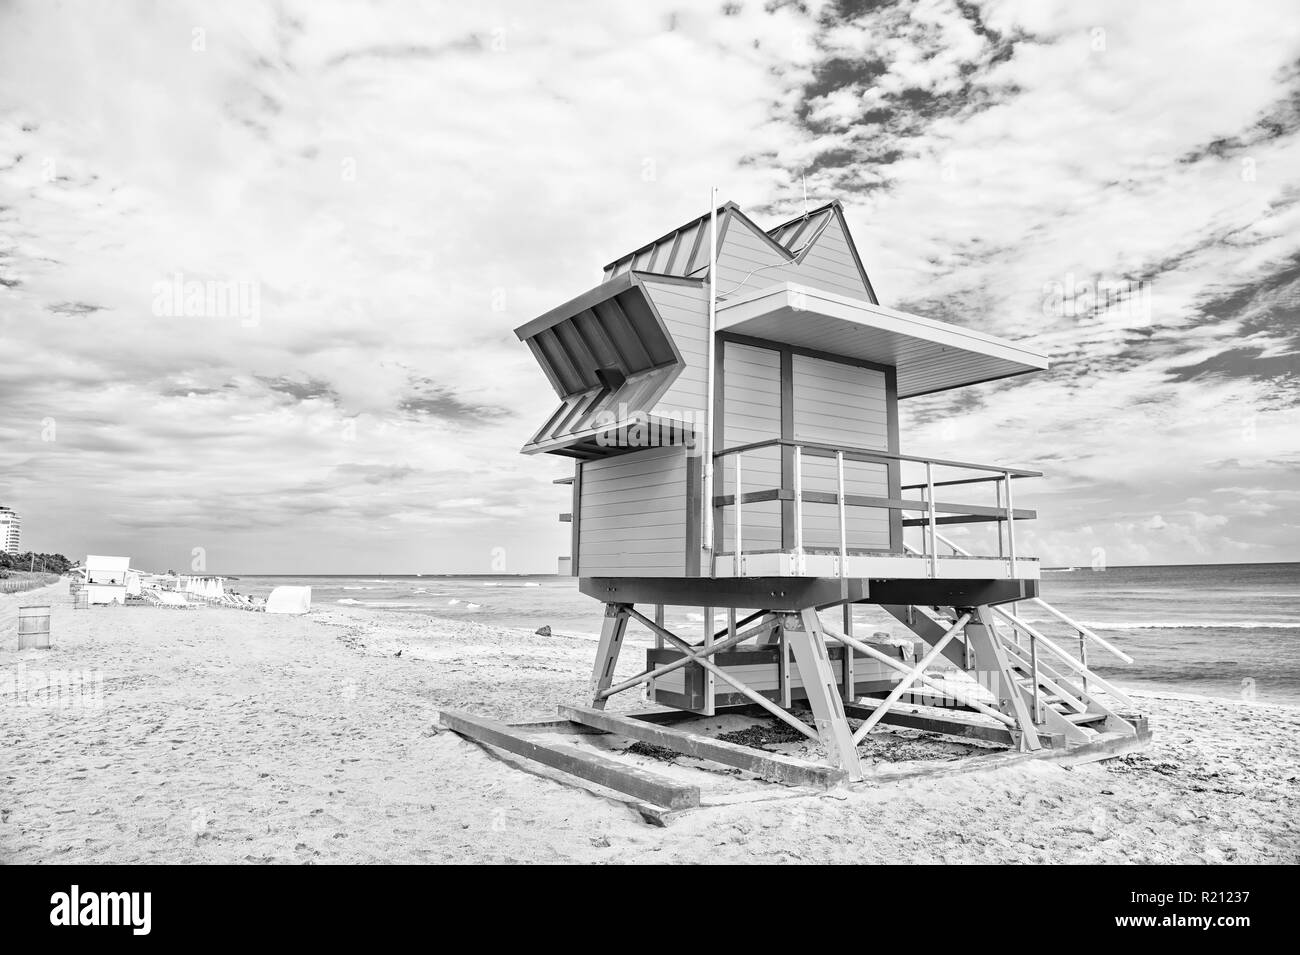 South Beach, Miami, Florida. lifeguard house in a colorful Art Deco style on cloudy blue sky at Miami South Beach and Atlantic Ocean in background, world famous travel location Stock Photo